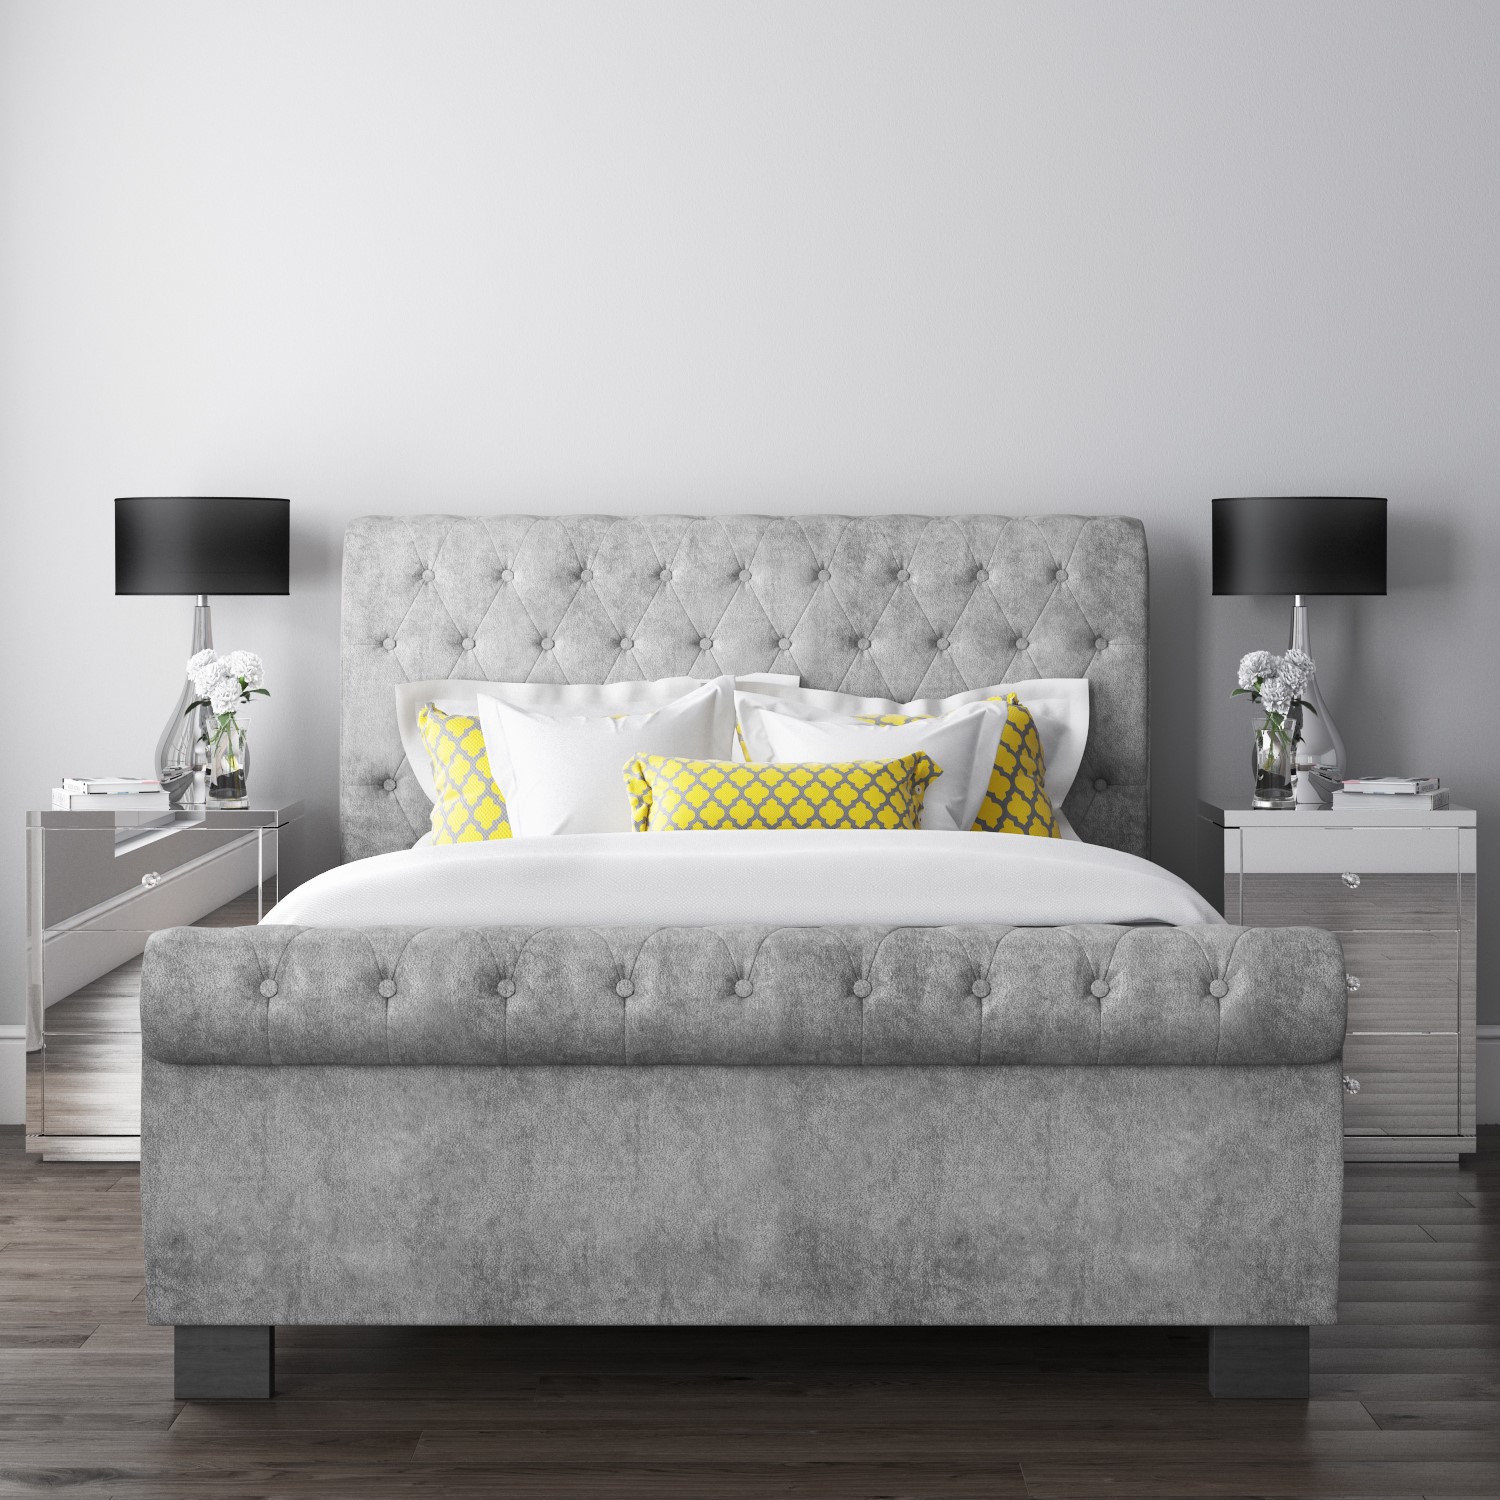 Safina Roll Top Kingsize Sleigh Bed In, King Size Sleigh Bed White